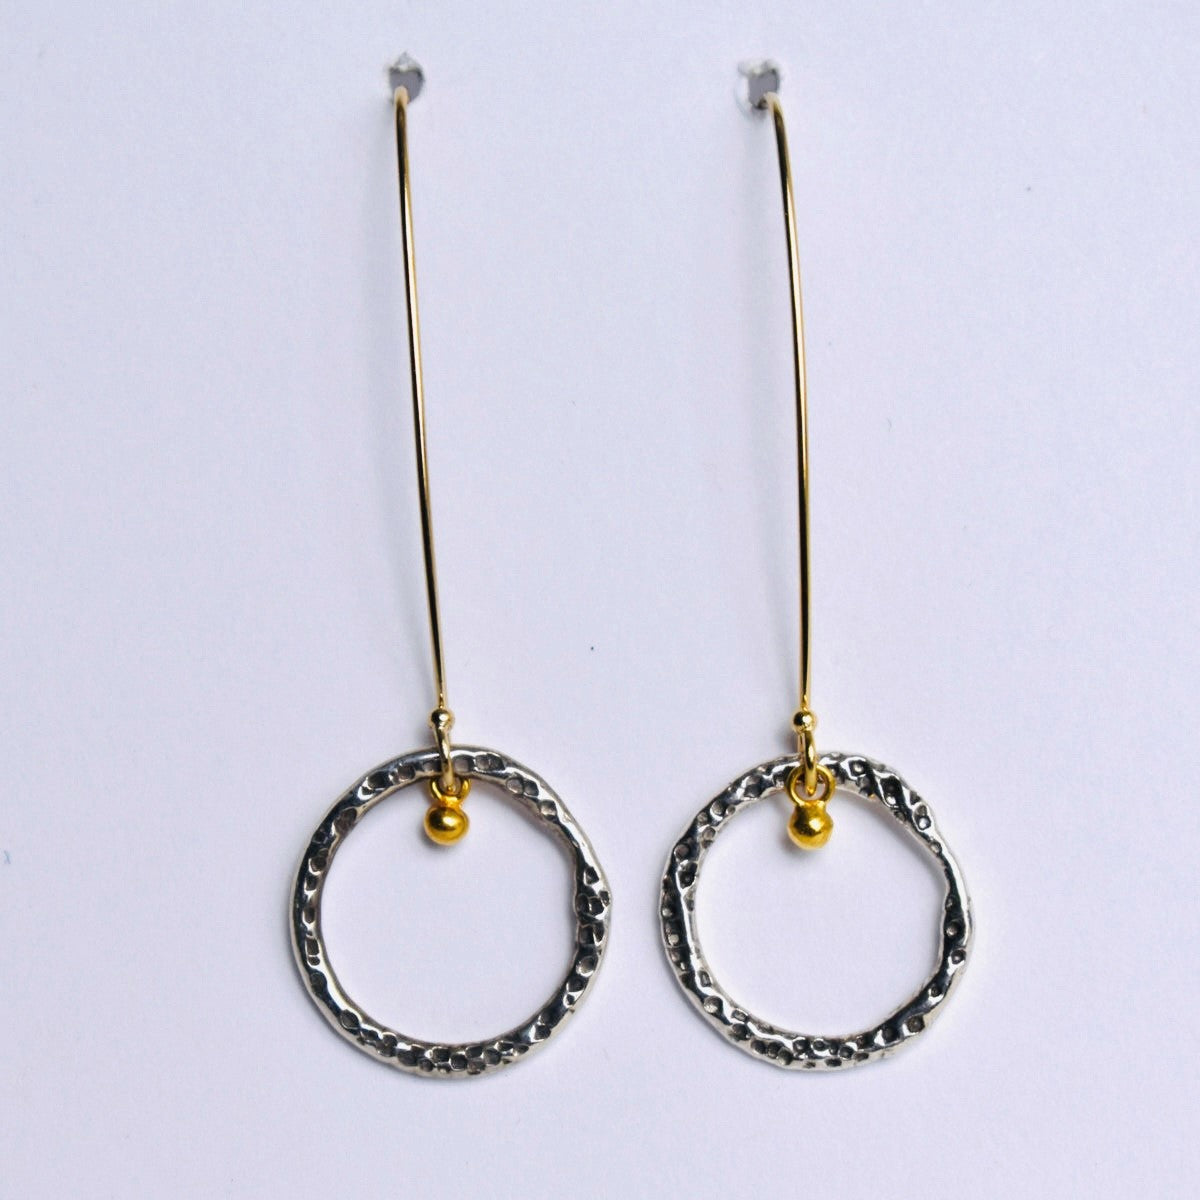 Fine sliver hammered circle on gold-filled wire earrings